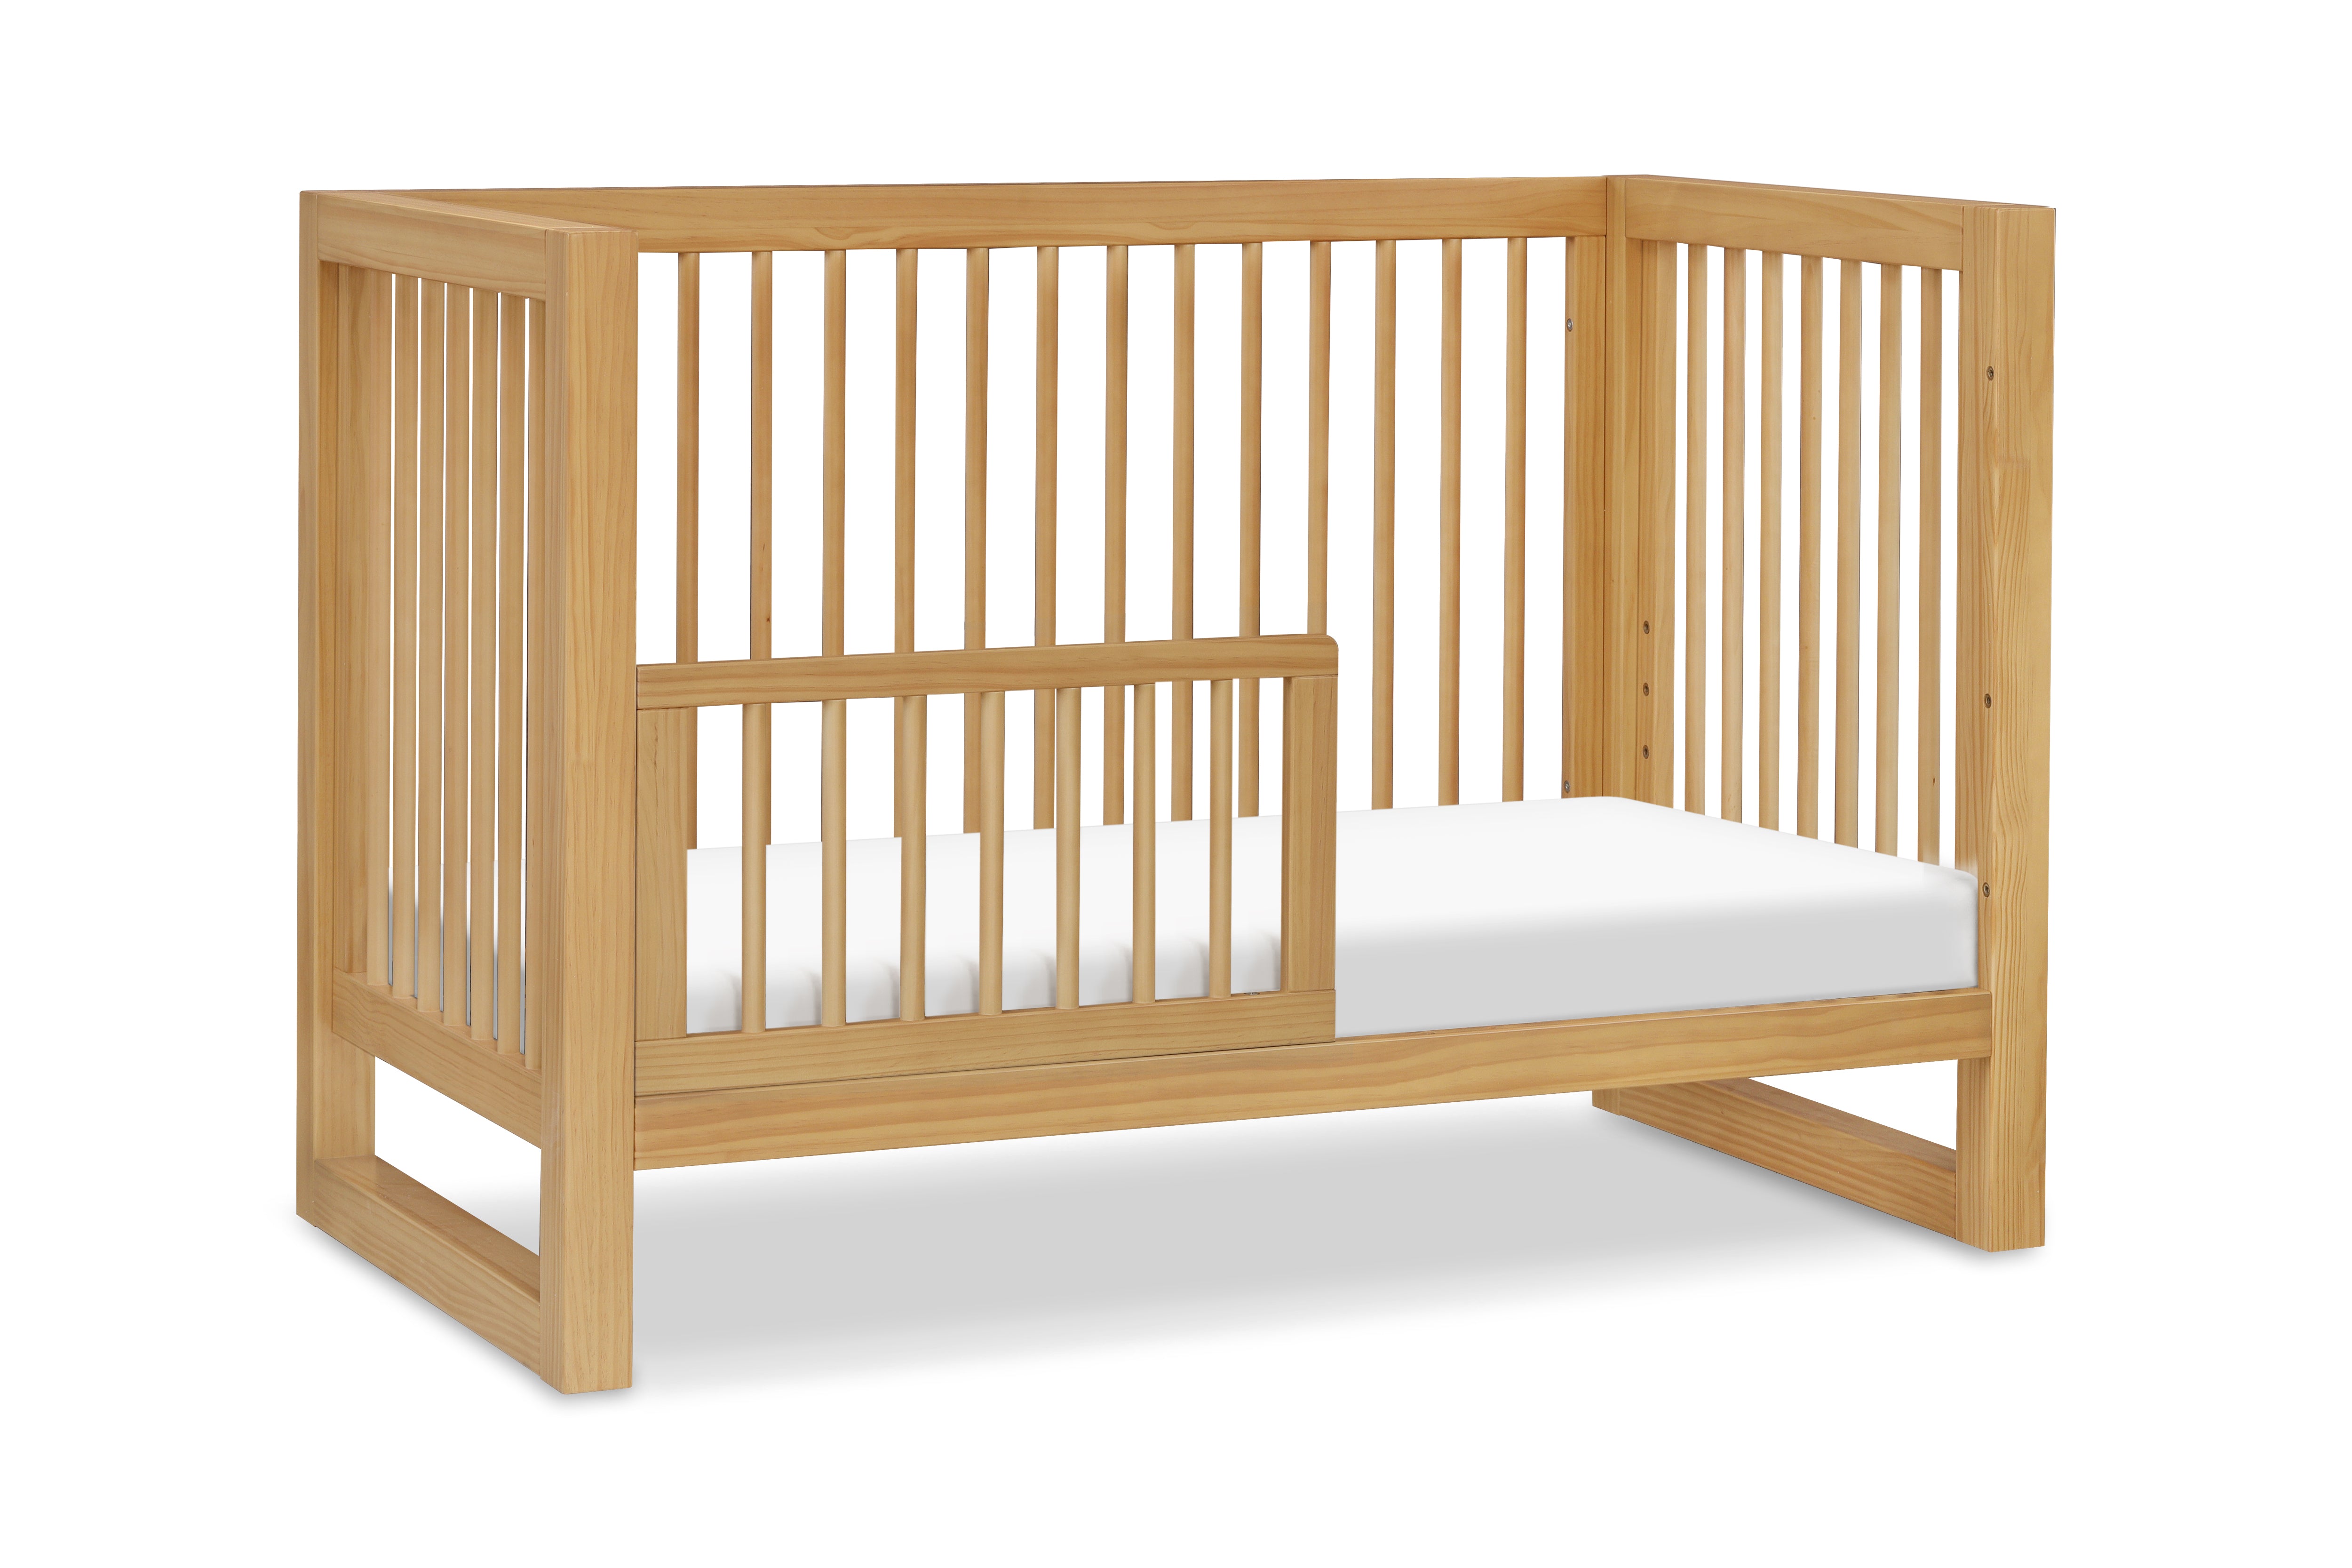 Nantucket 3-in-1 Convertible Crib with Toddler Bed Conversion Kit - Honey - Twinkle Twinkle Little One